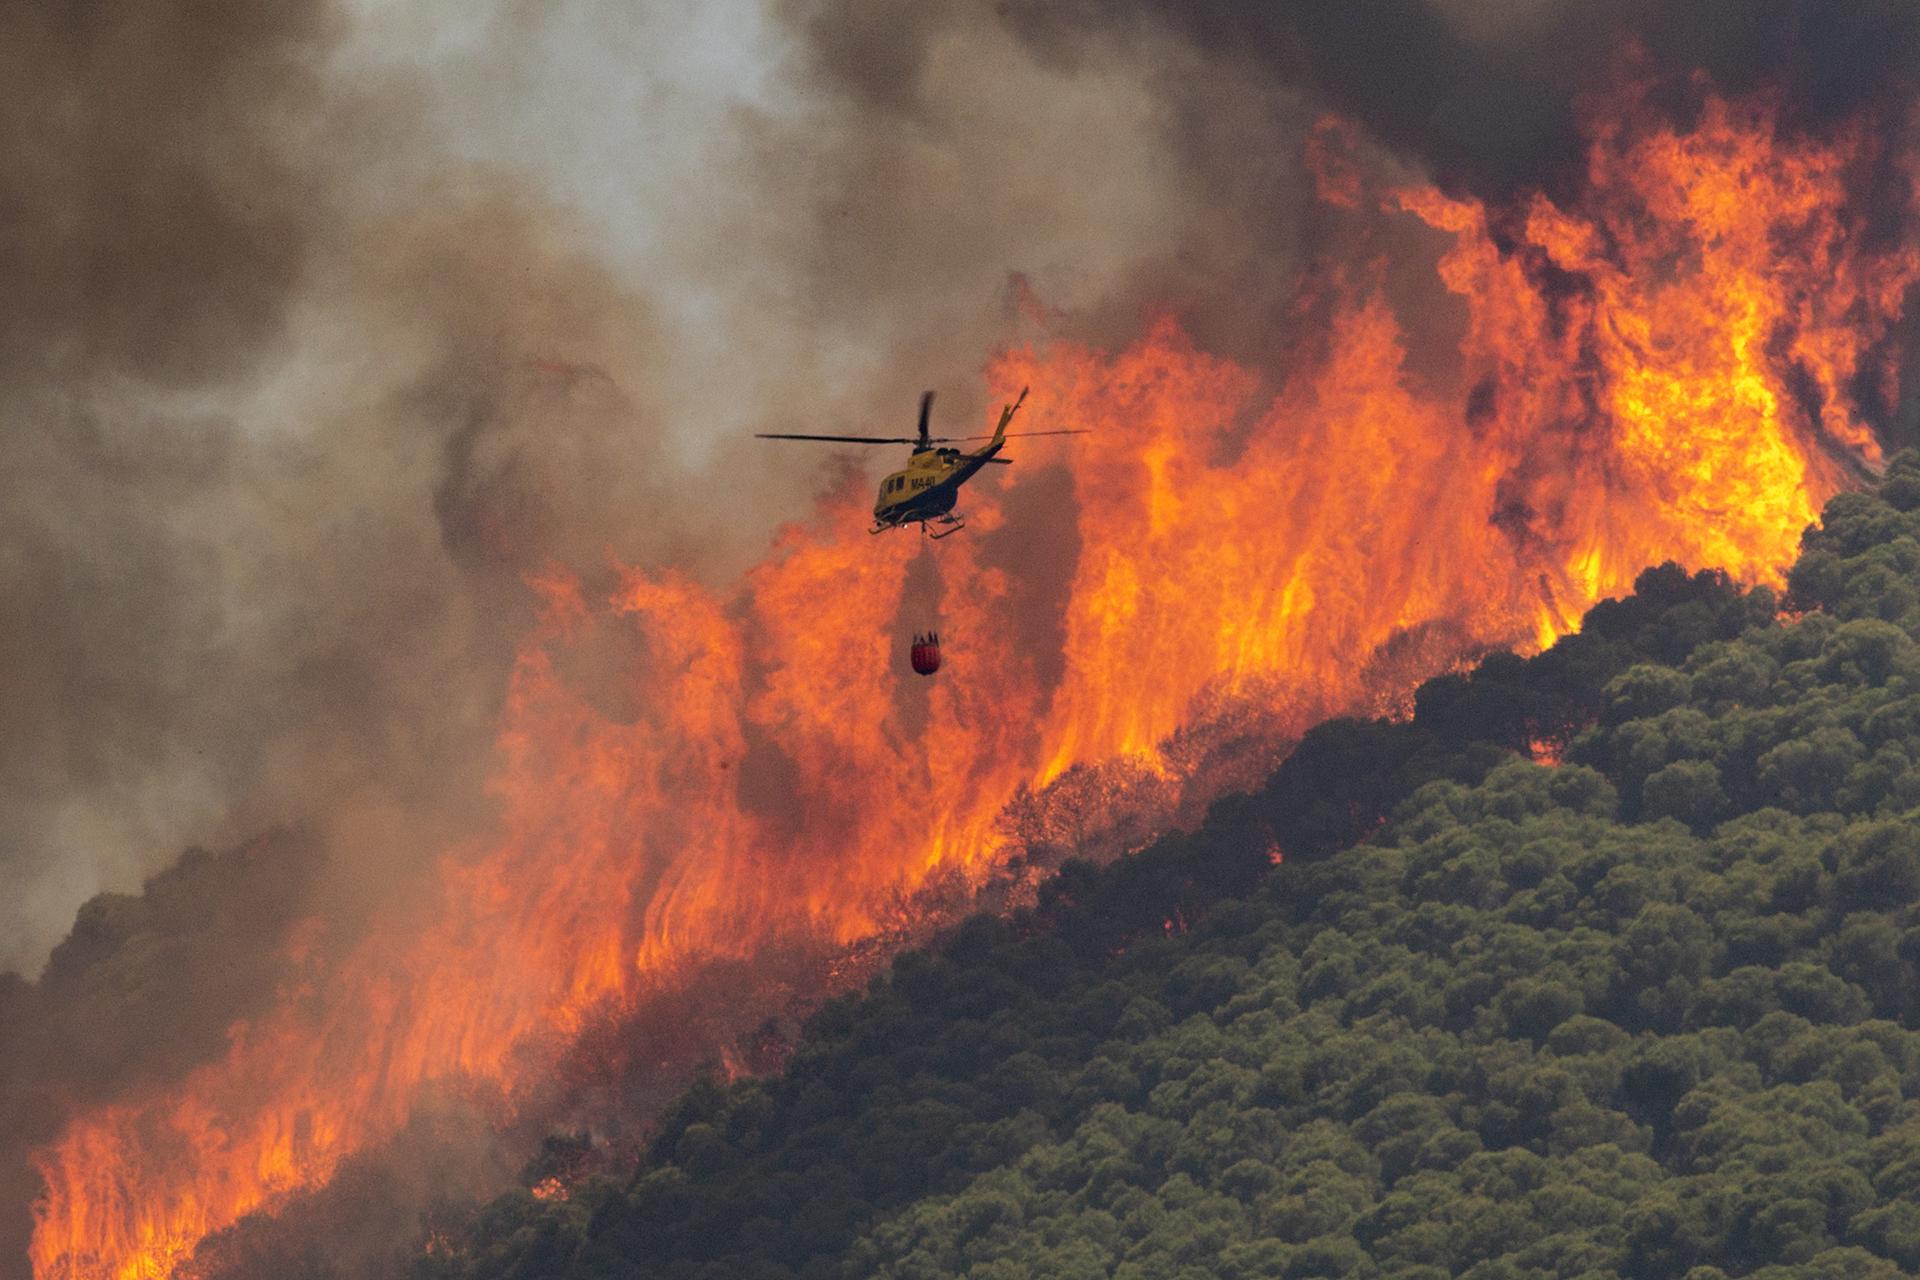 File photo of a helicopter working to extinguish a fire in Malaga, Spain, July 15, 2022. EFE/Daniel Pérez